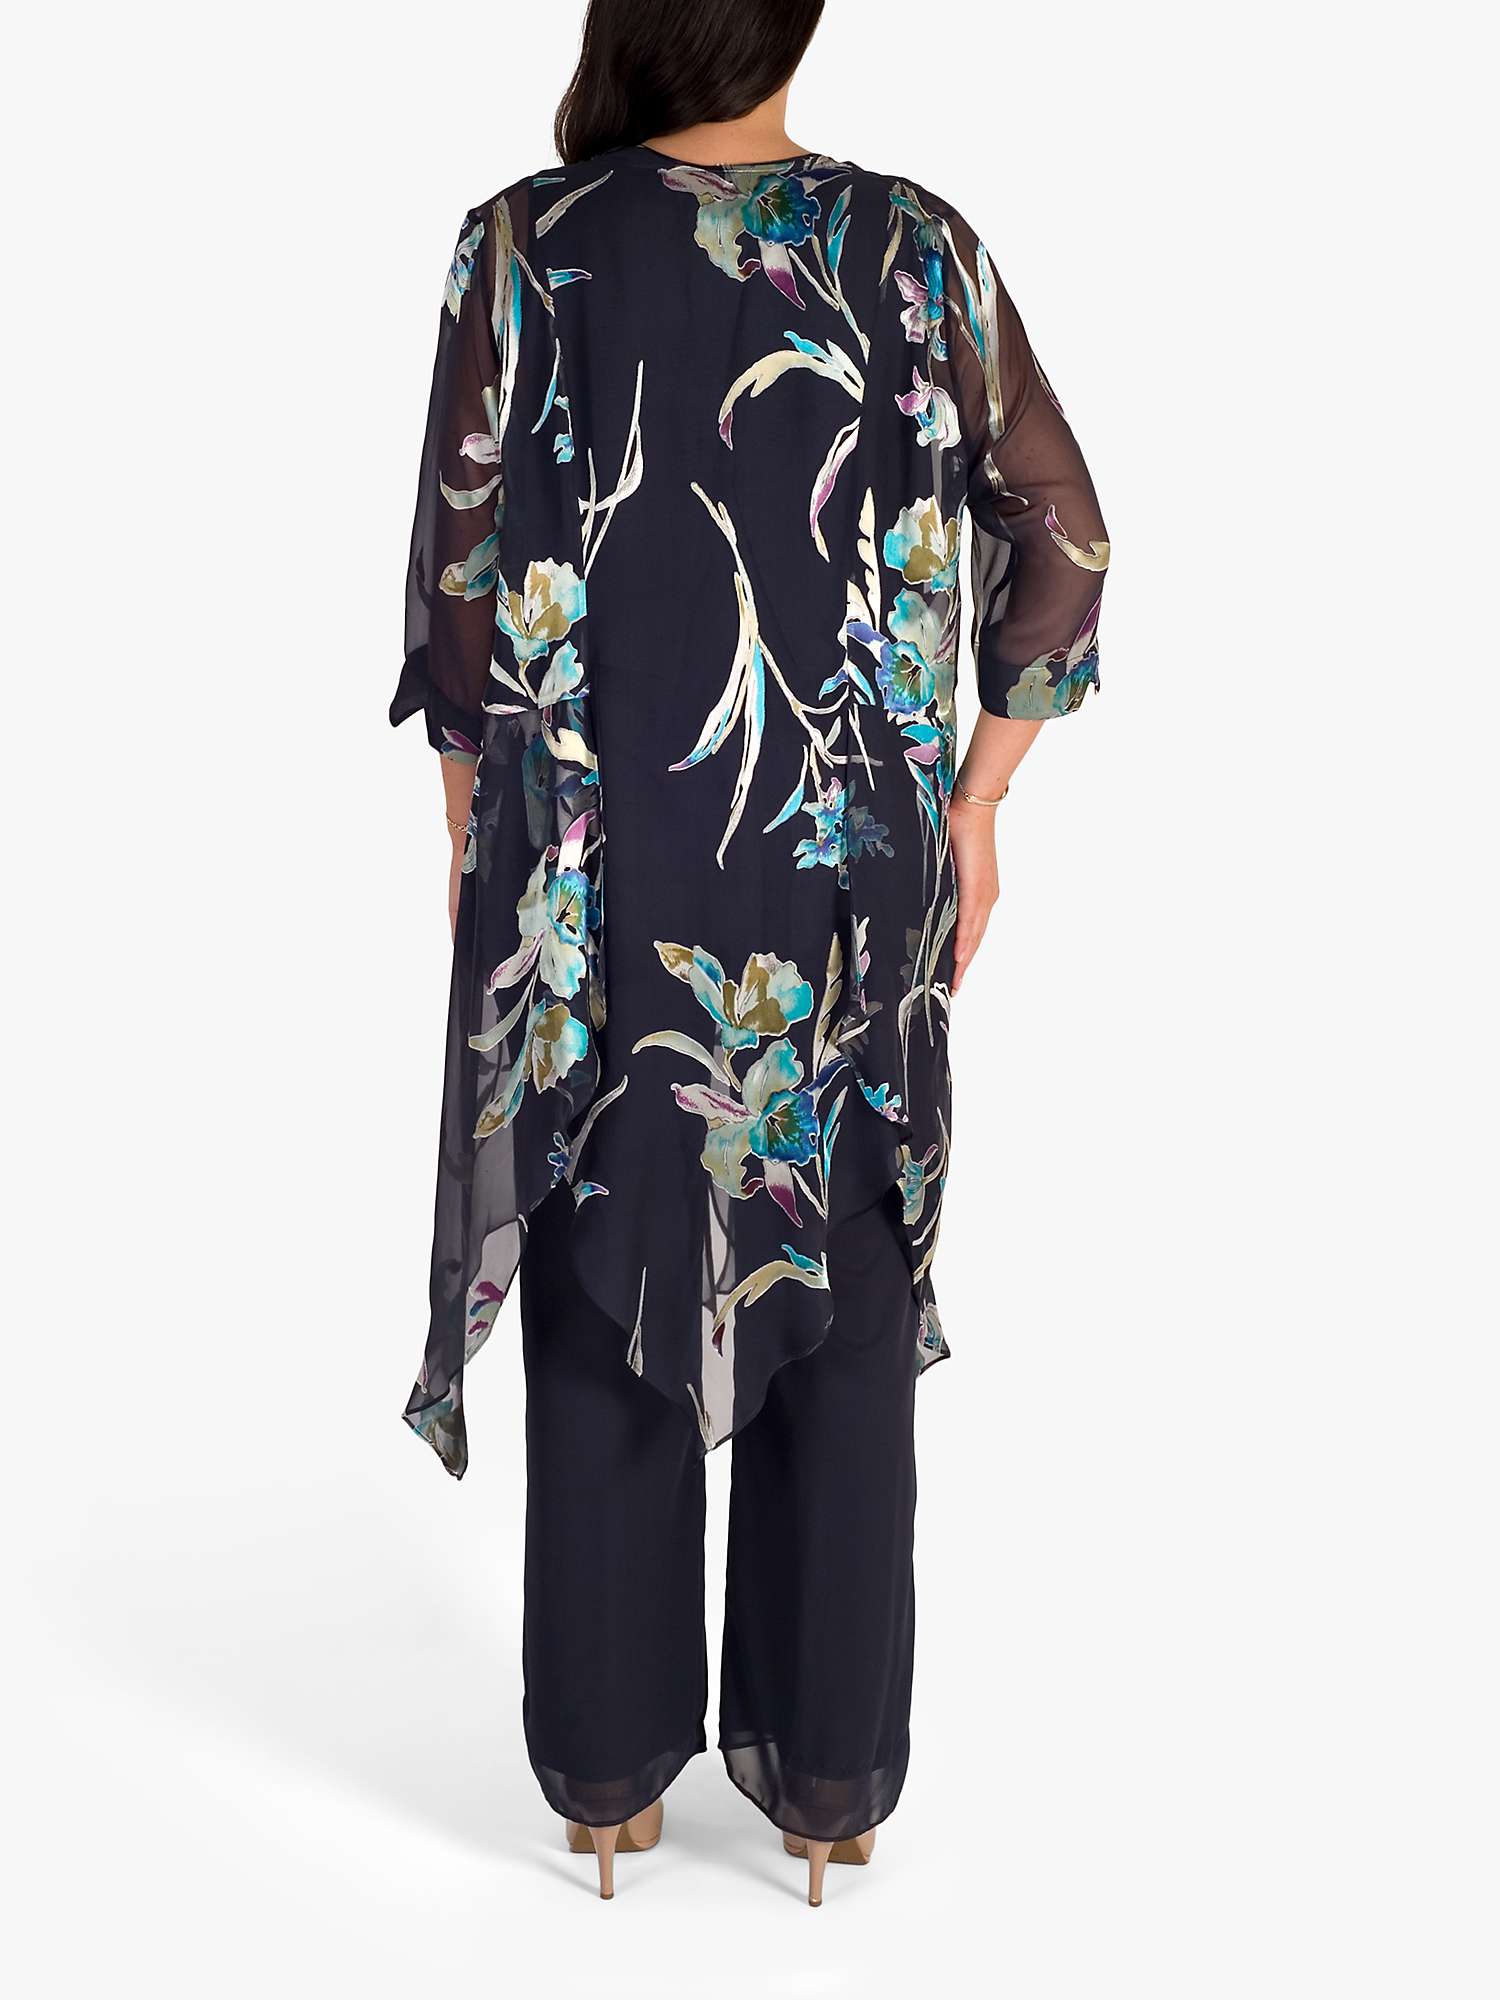 Buy chesca Floral Print Pixie Hem Coat, Pewter/Turquoise Online at johnlewis.com